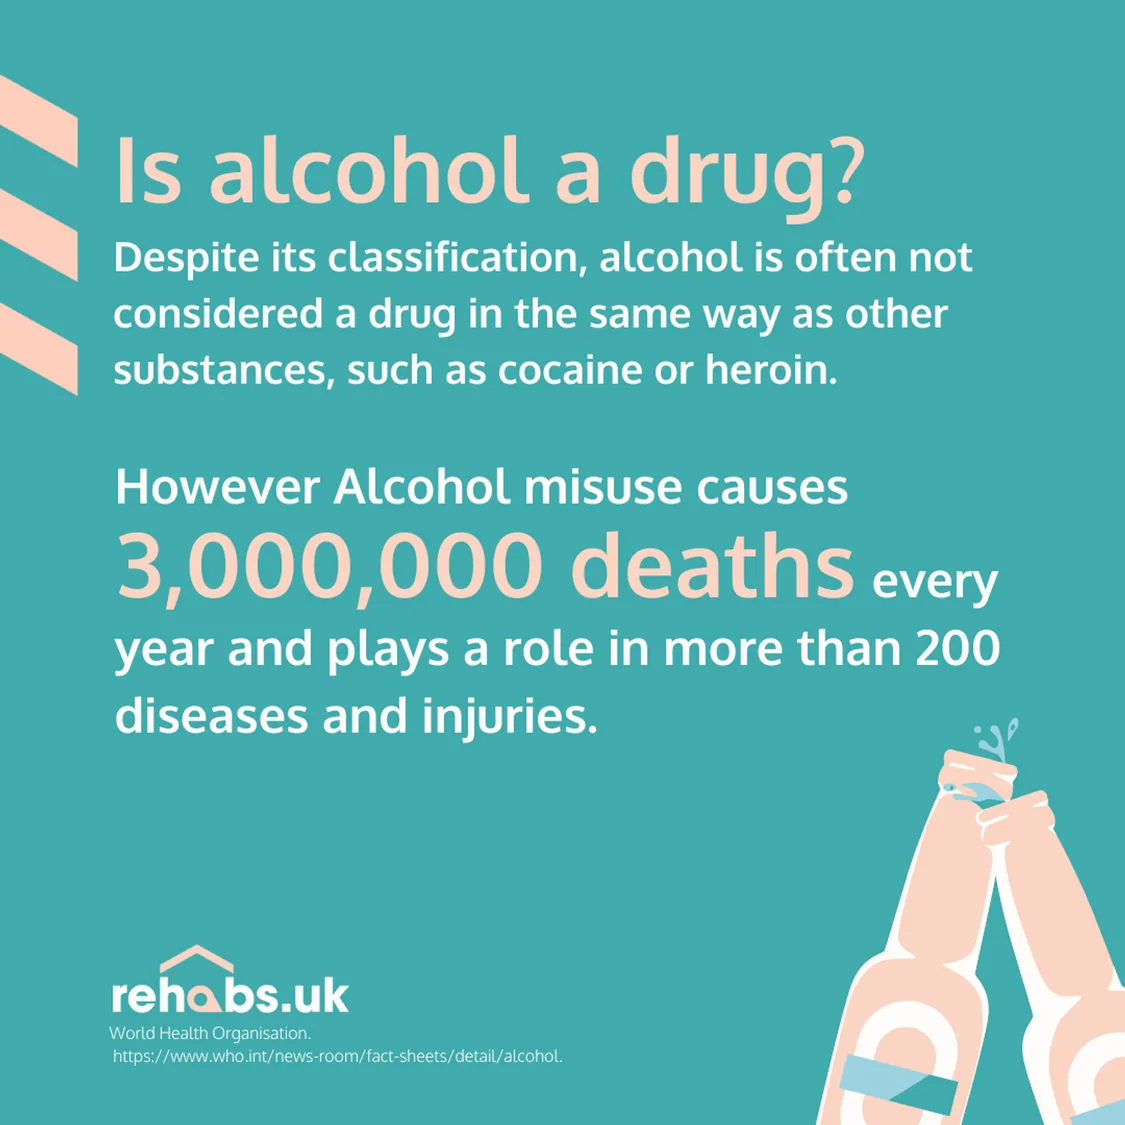 Is alcohol a drug? Despite its classification, alcohol is often not considered a drug in the same way as other substances, such as cocaine or heroin. However Alcohol misuse causes 3,000,000 deaths                                                            every year and plays a role in more than 200 diseases and injuries.